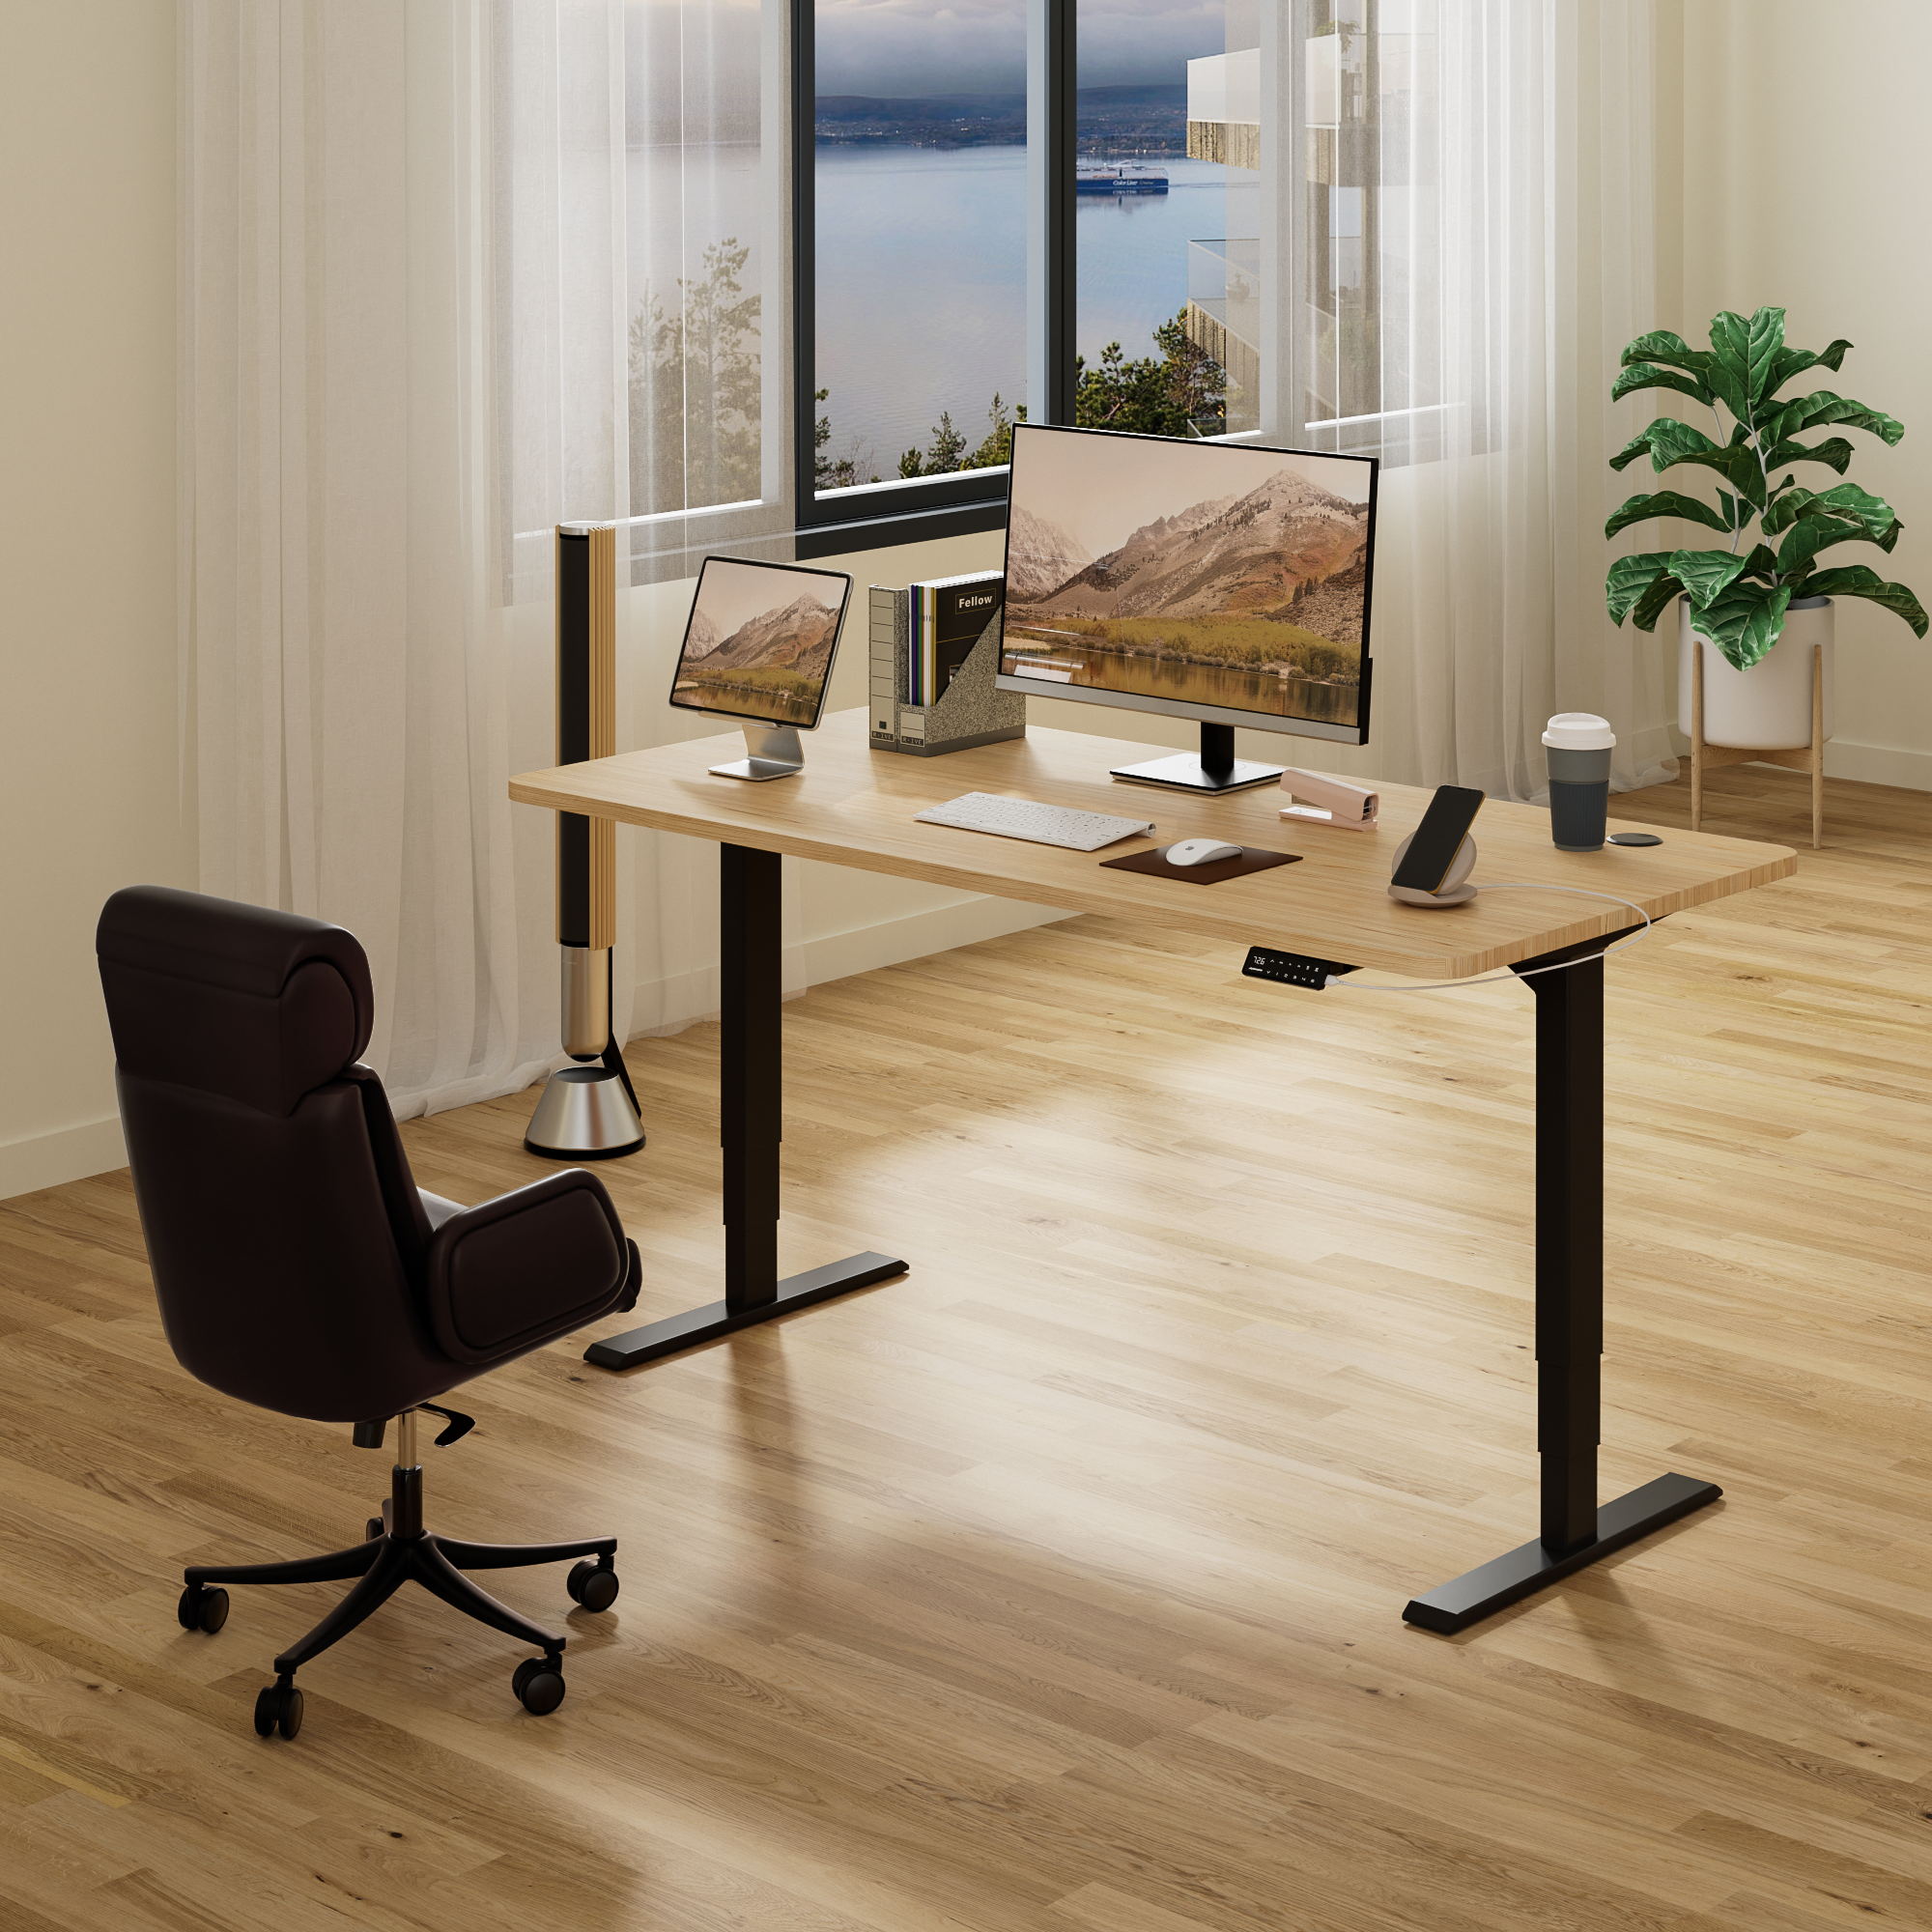 Maidesite S2 Pro Plus height adjustable desk has a USB charging port to recharge your phone